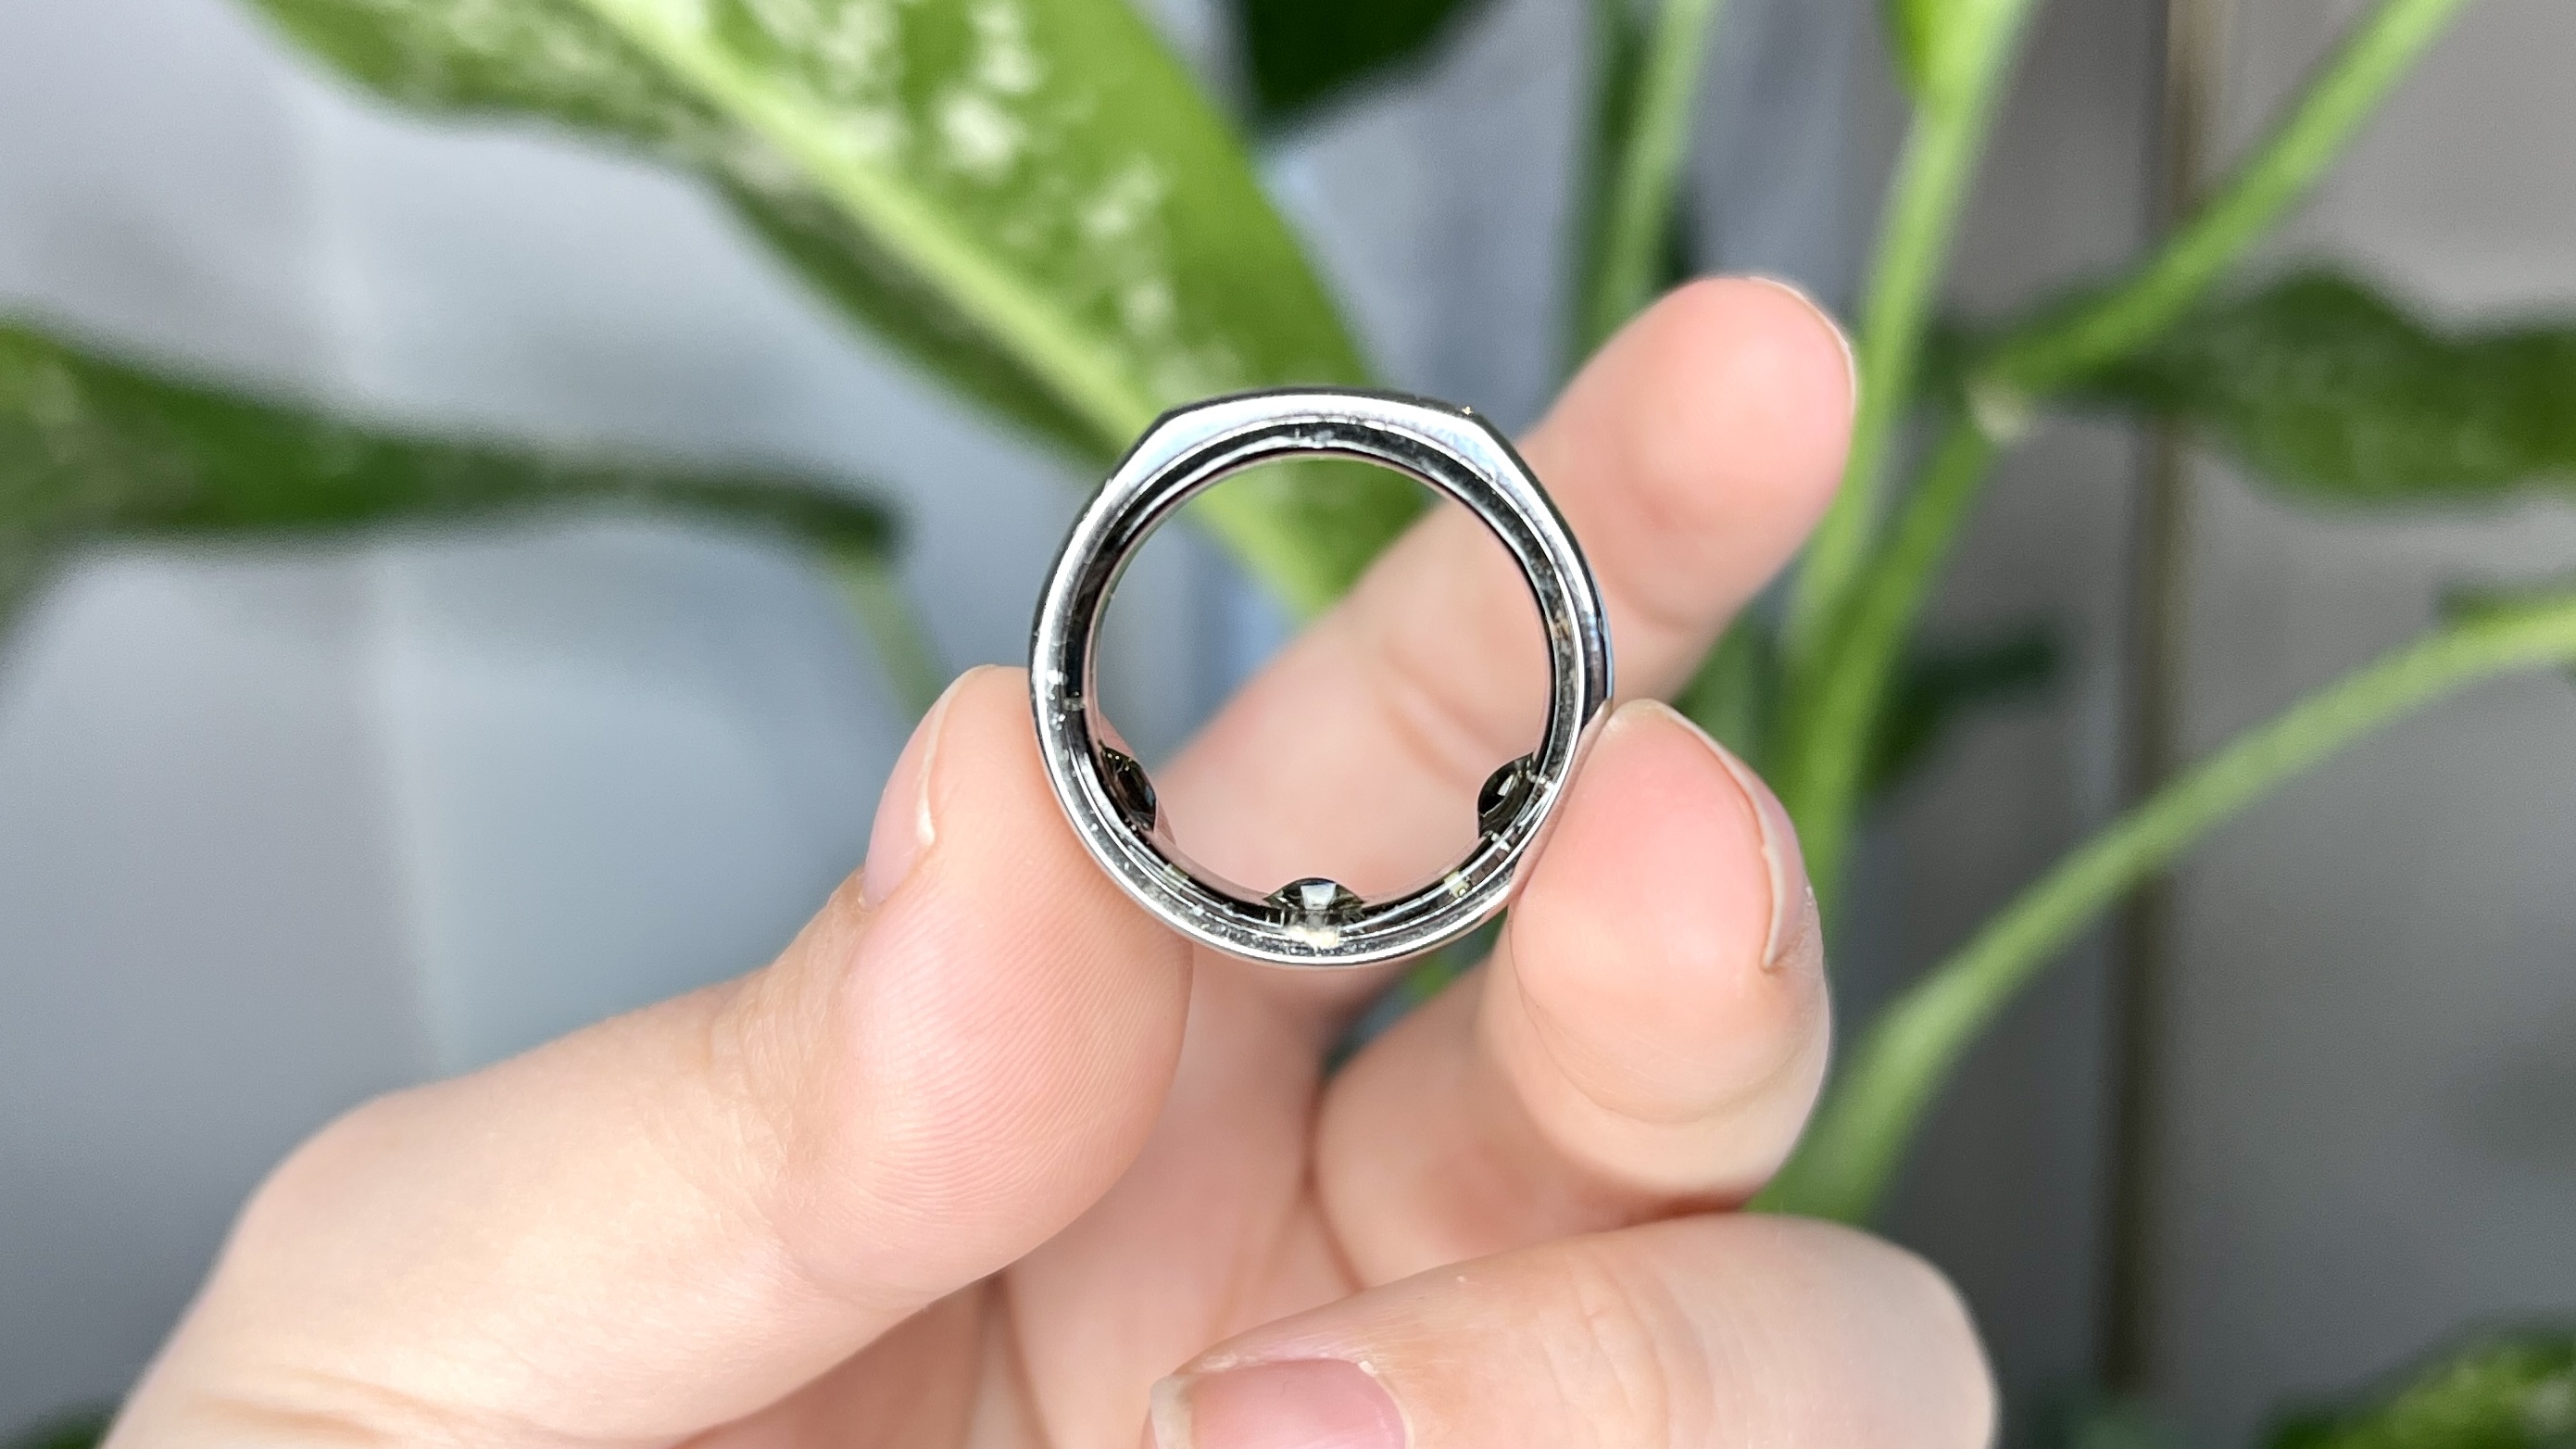 Oura Ring Generation 3 review: What I like and don't like